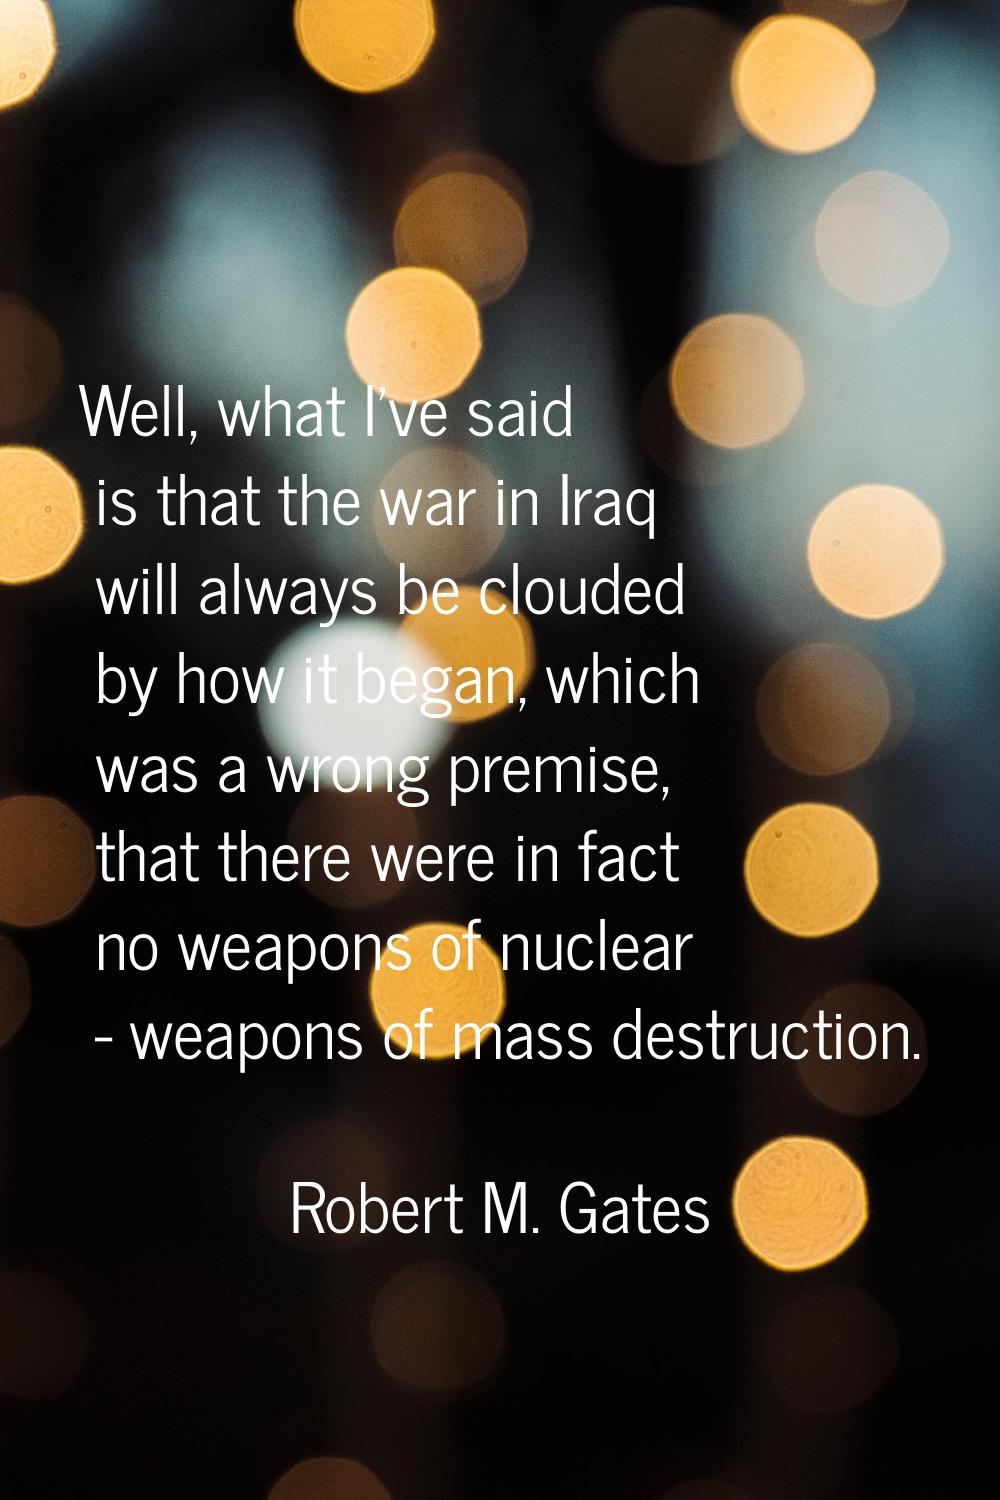 Well, what I've said is that the war in Iraq will always be clouded by how it began, which was a wr